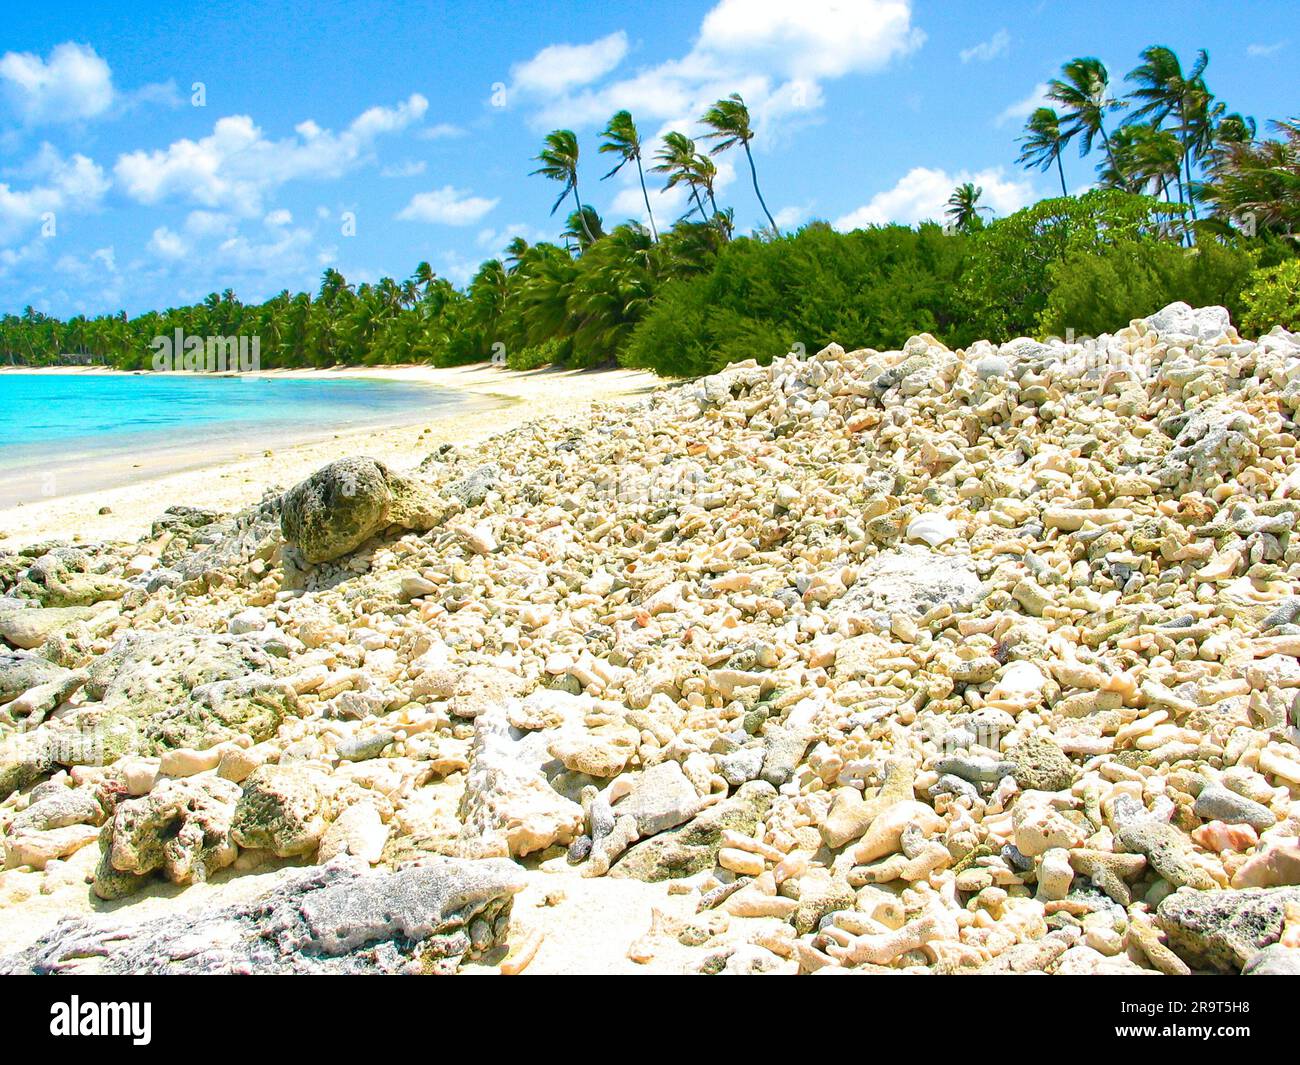 Coconut palms and coral rubble on the beach at Cocos Keeling Islands. Stock Photo